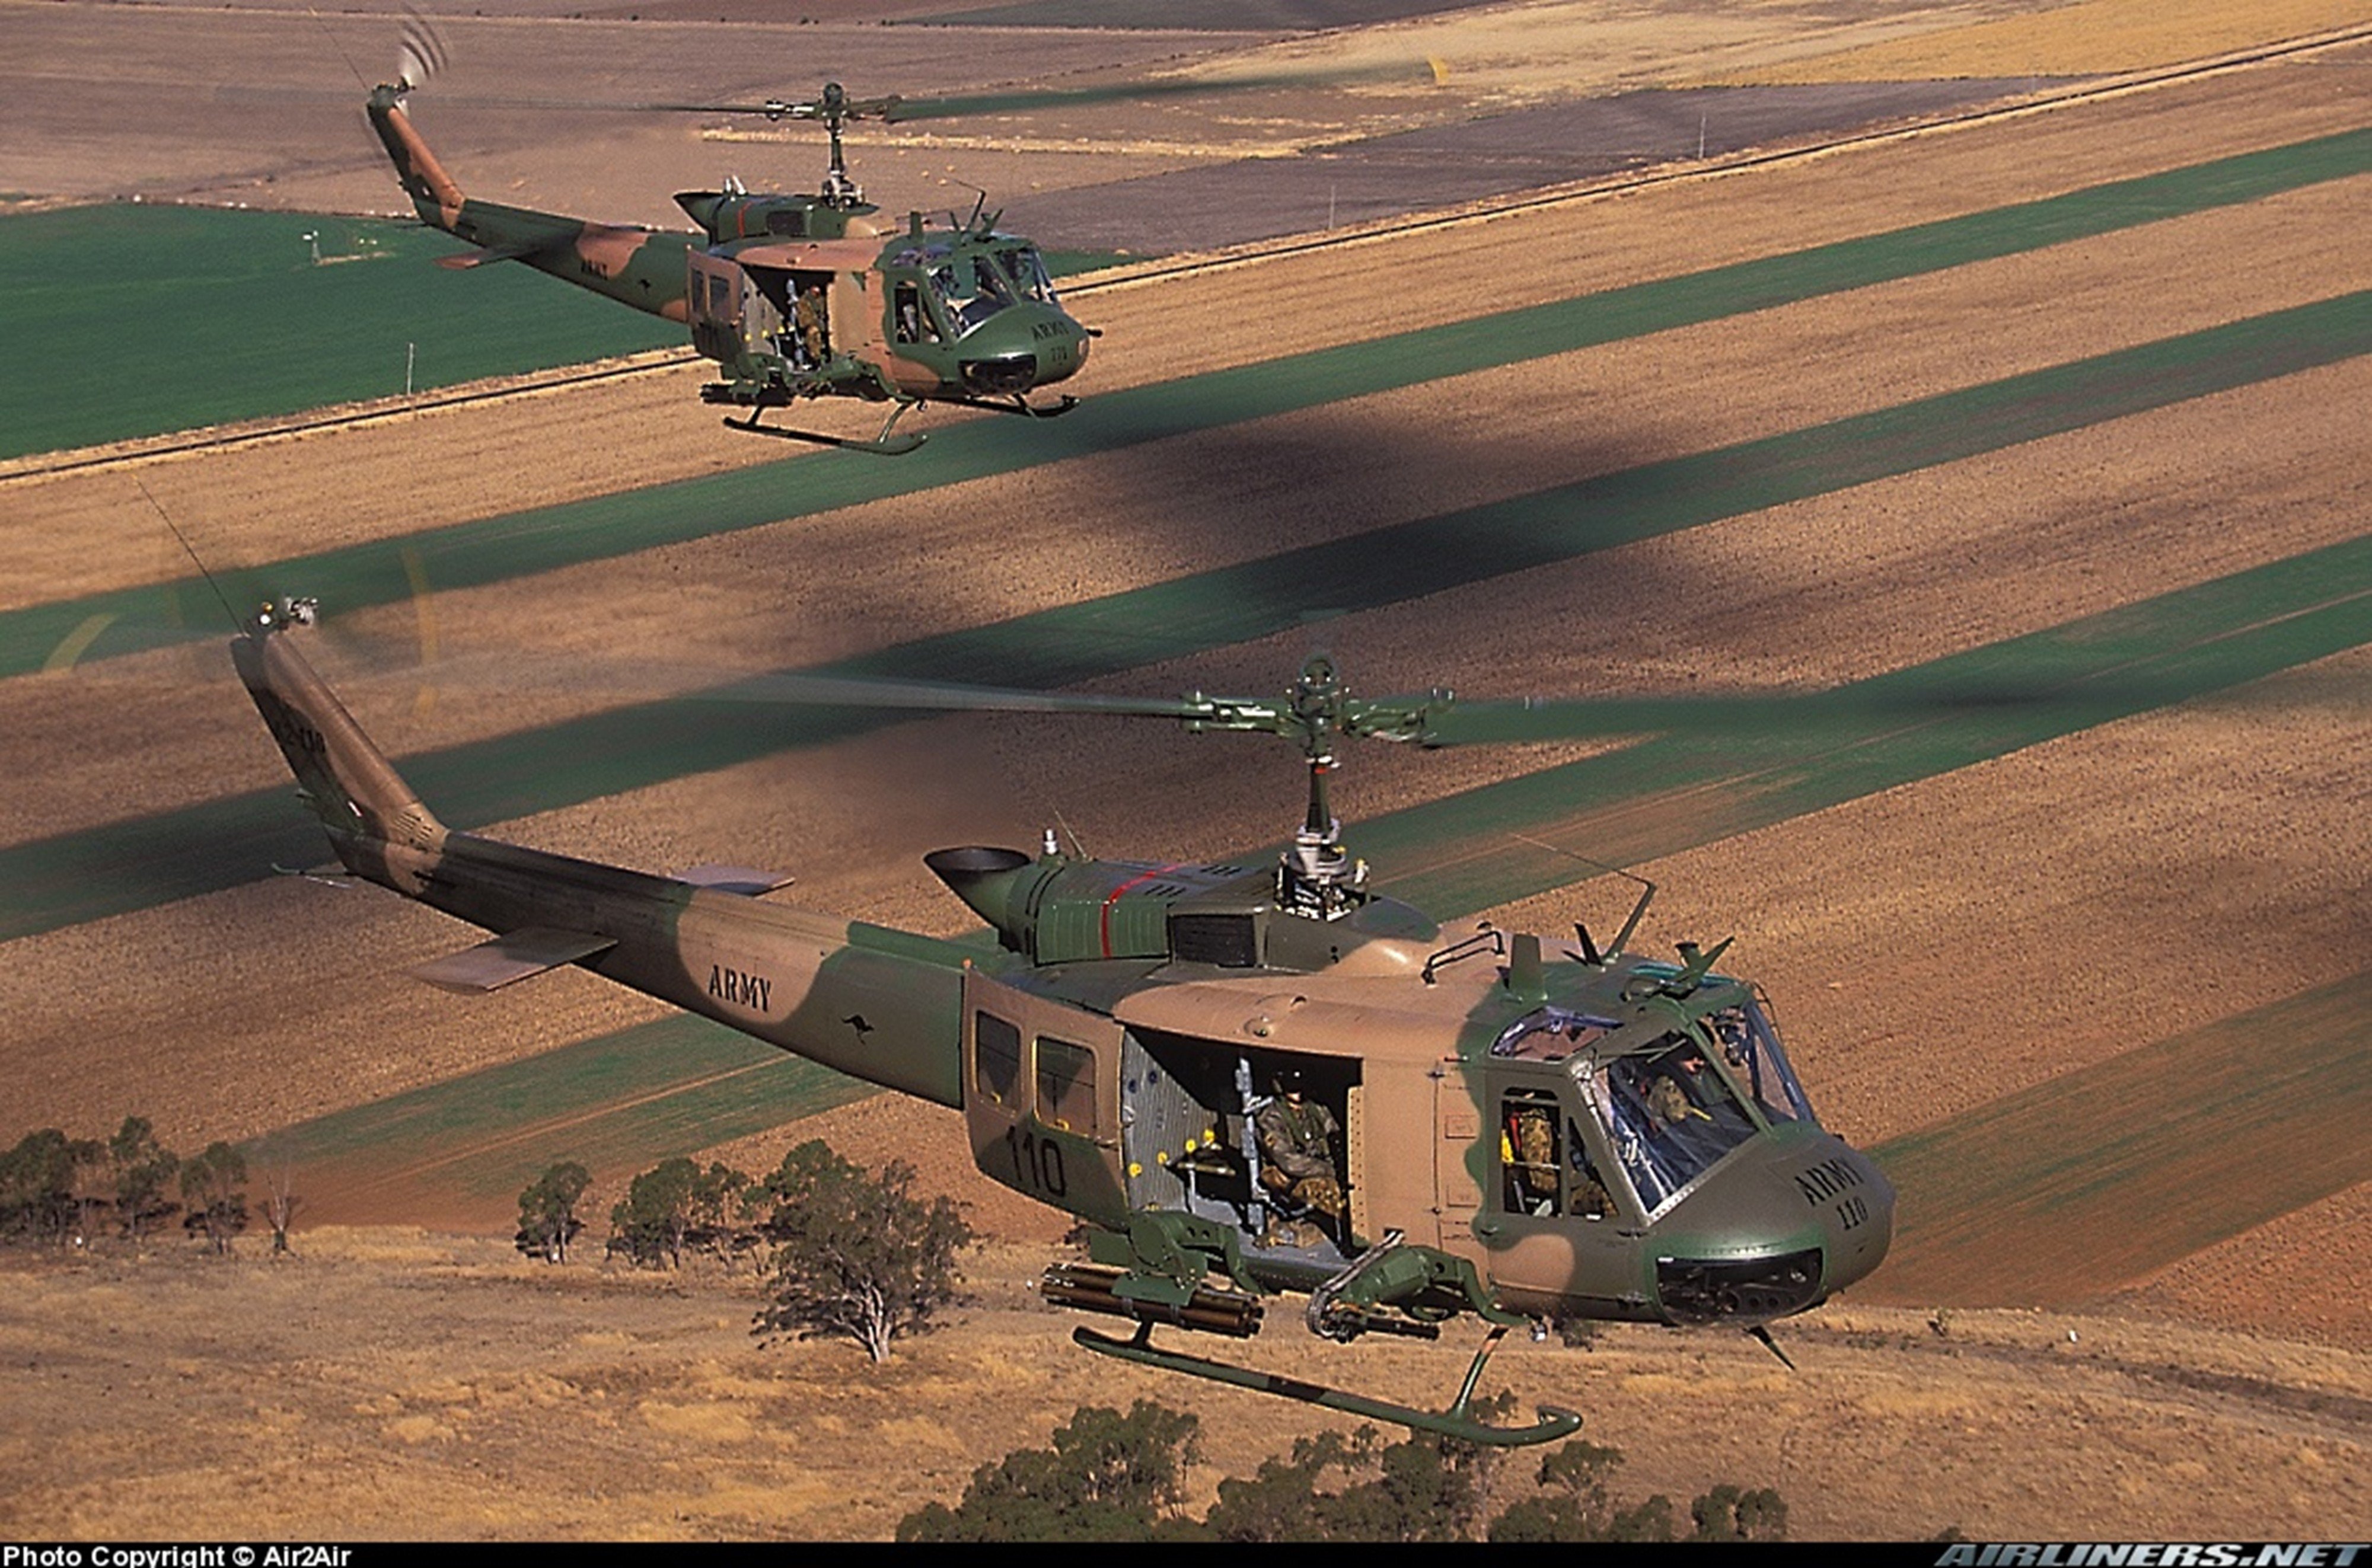 helicopter, Aircraft, Trasport, Rescue, Huey, Australia, Military, Arm Wallpaper